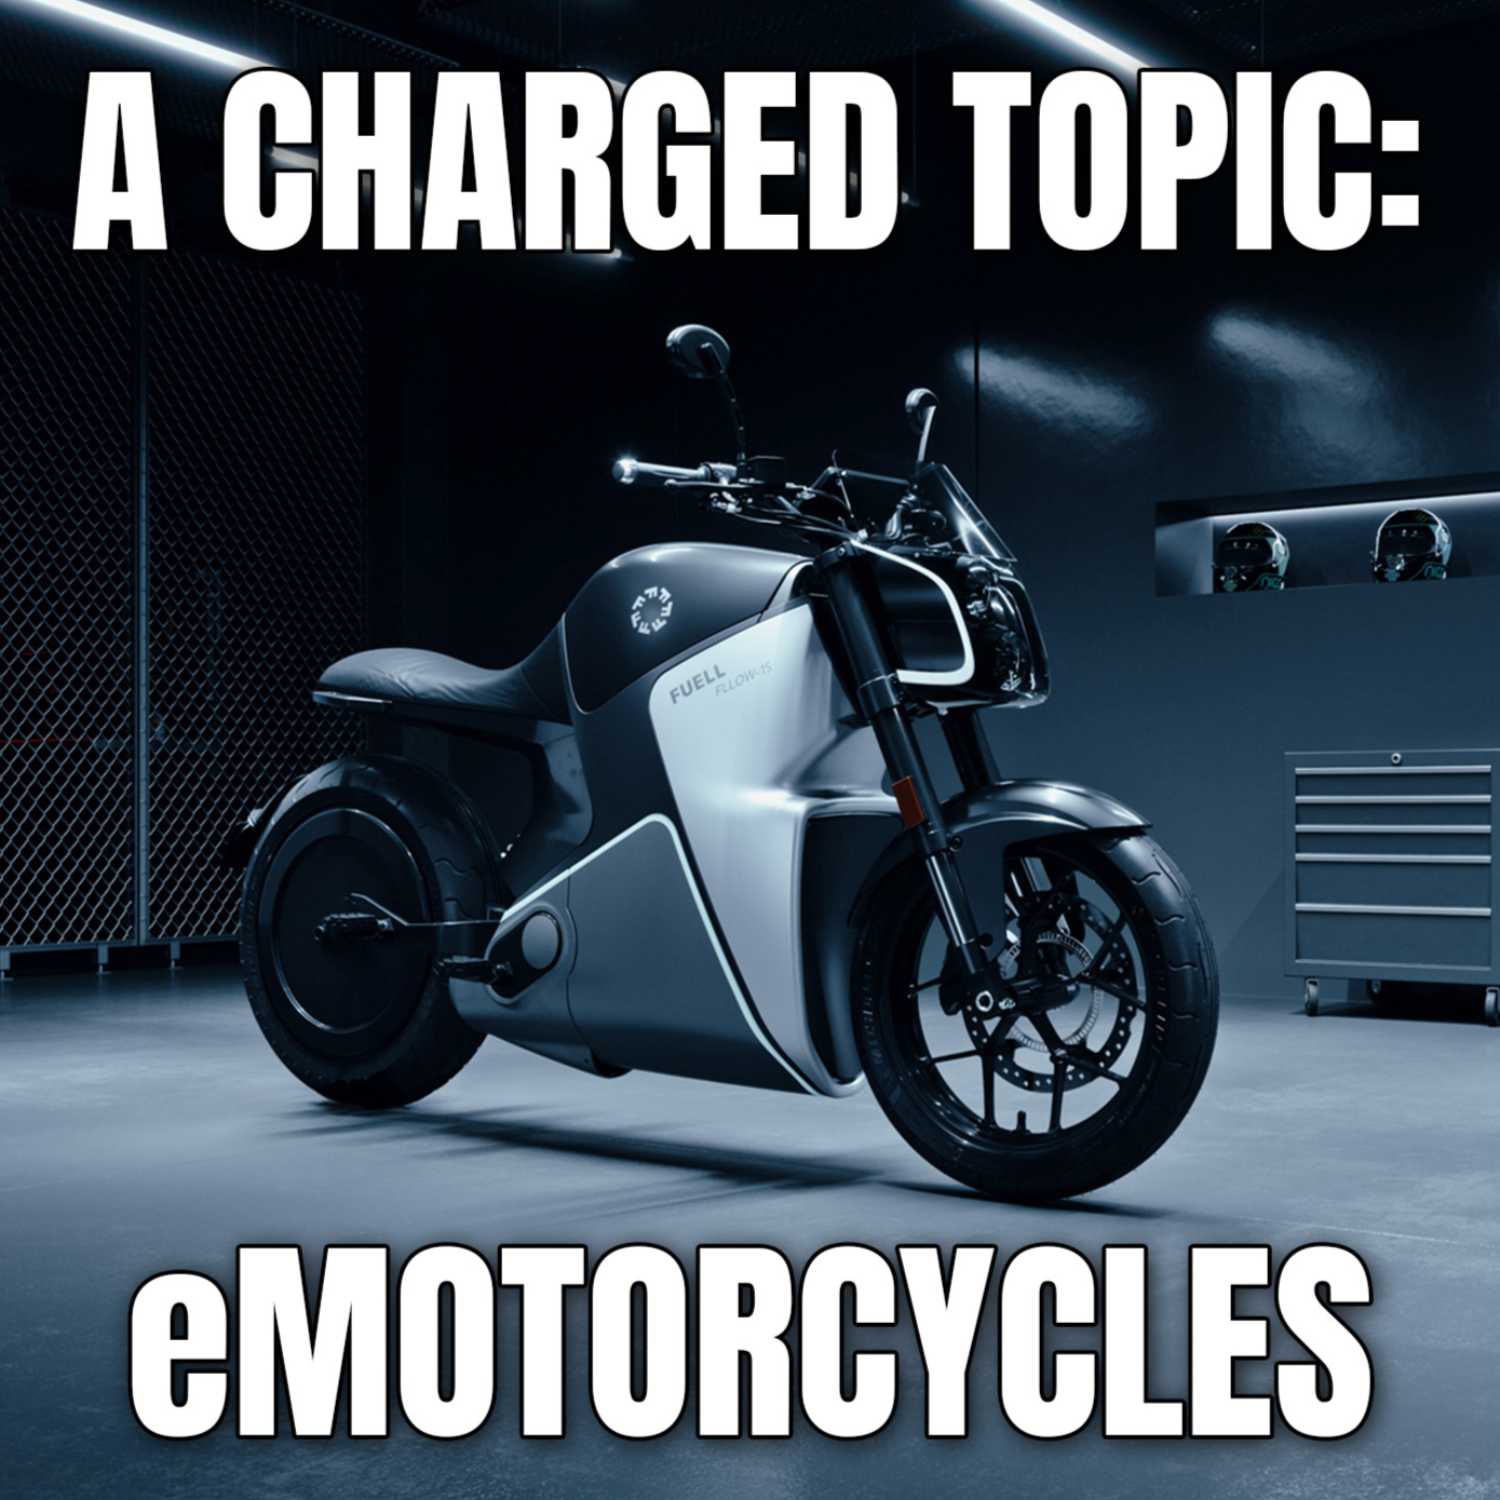 Riding the Lightning: The Electric Motorcycle Revolution